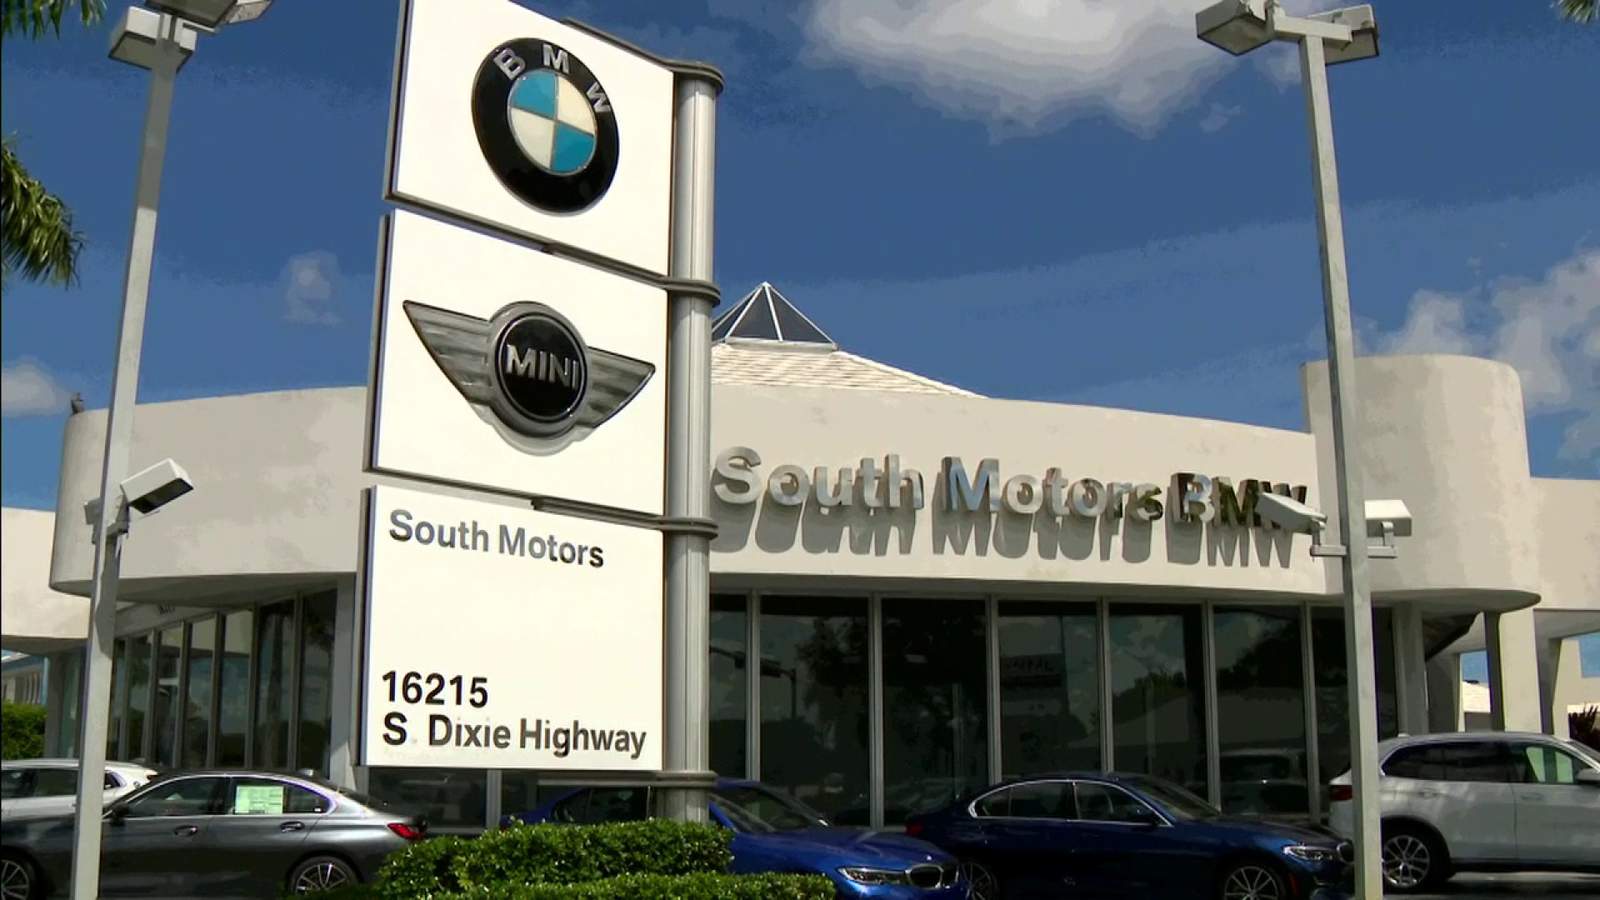 Man claims South Florida BMW dealership wrecked his car that was in for service and is hiding details about crash